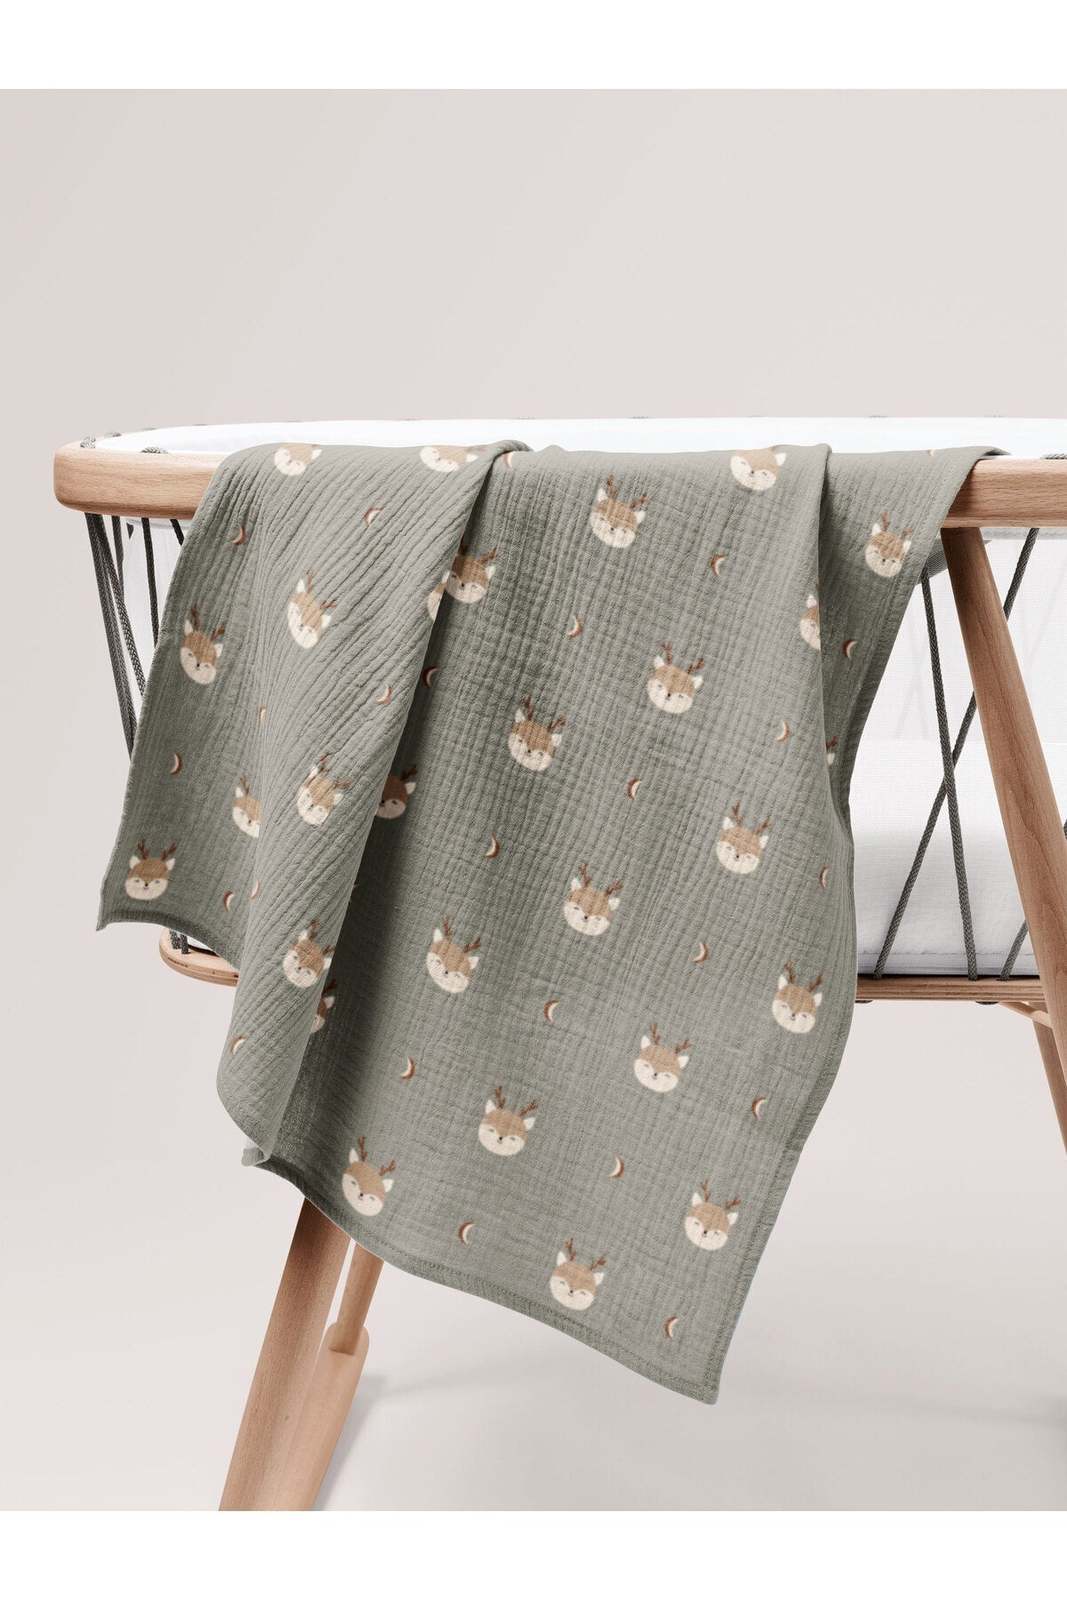 Primary image for Forest Deer Organic Crinkle Square Muslin Cover 100 x 100 cm